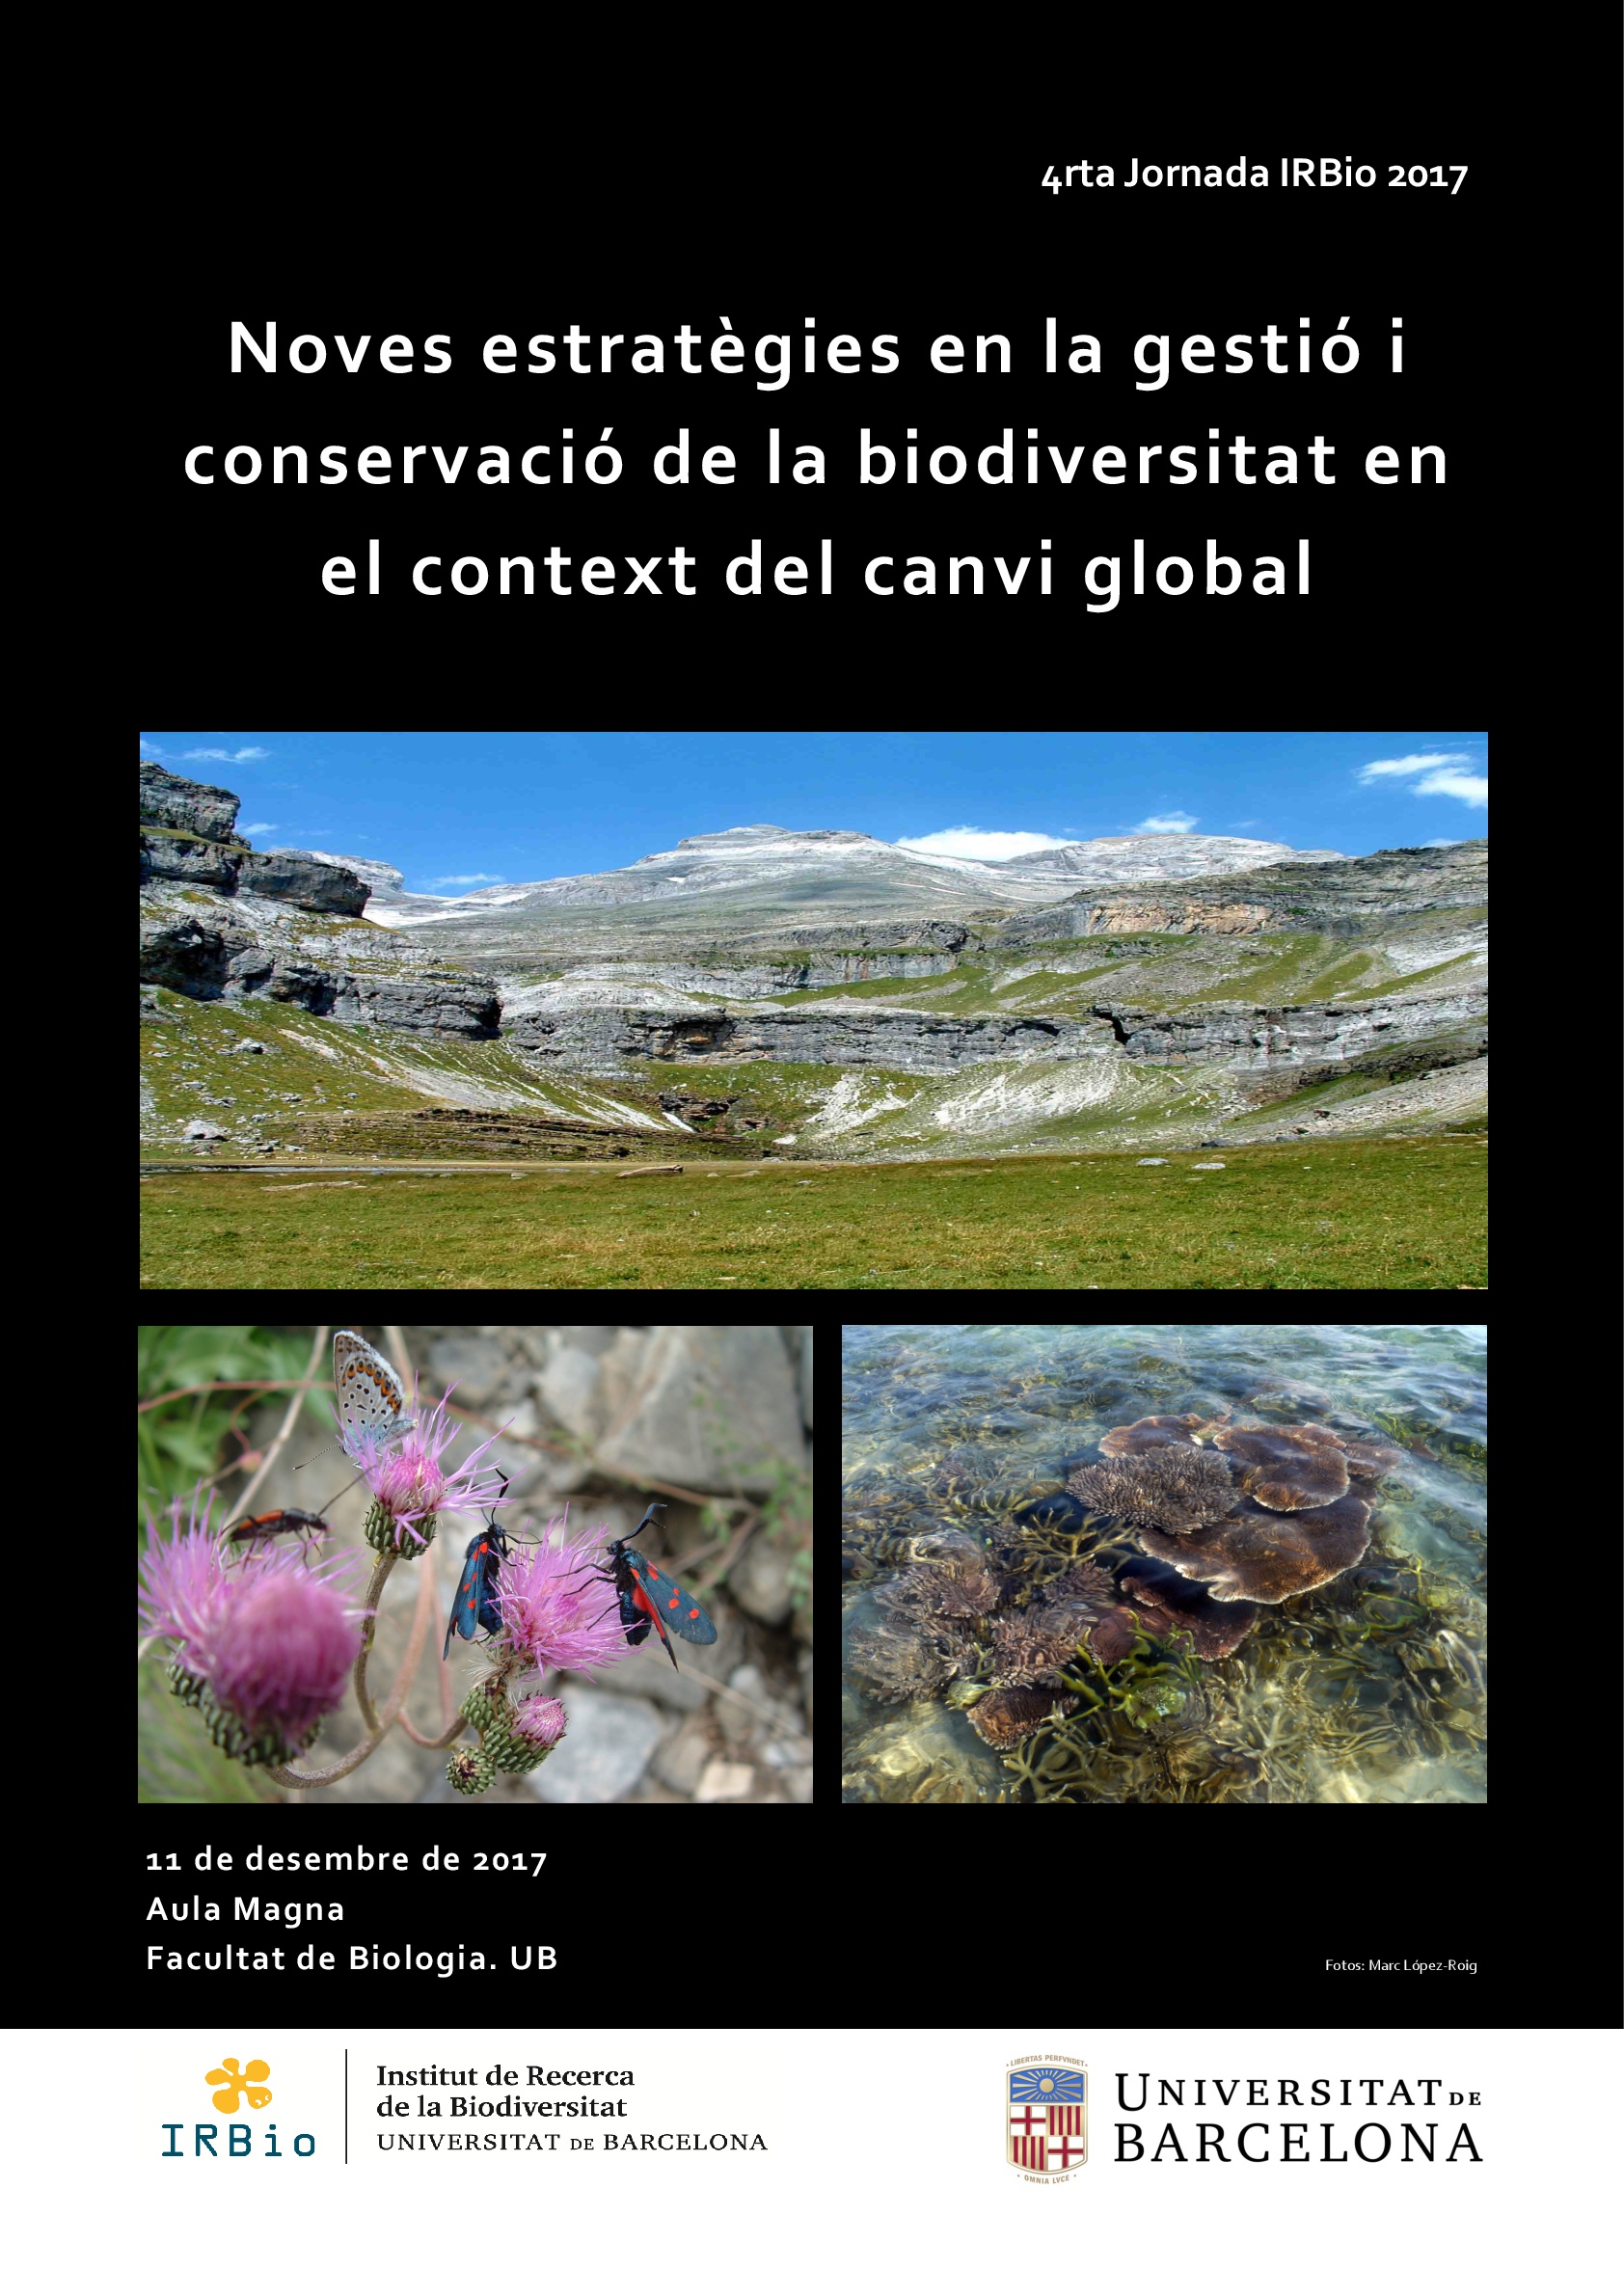 4rt Jornada IRBio new strategies in the management and conservation of biodiversity in the context of global change